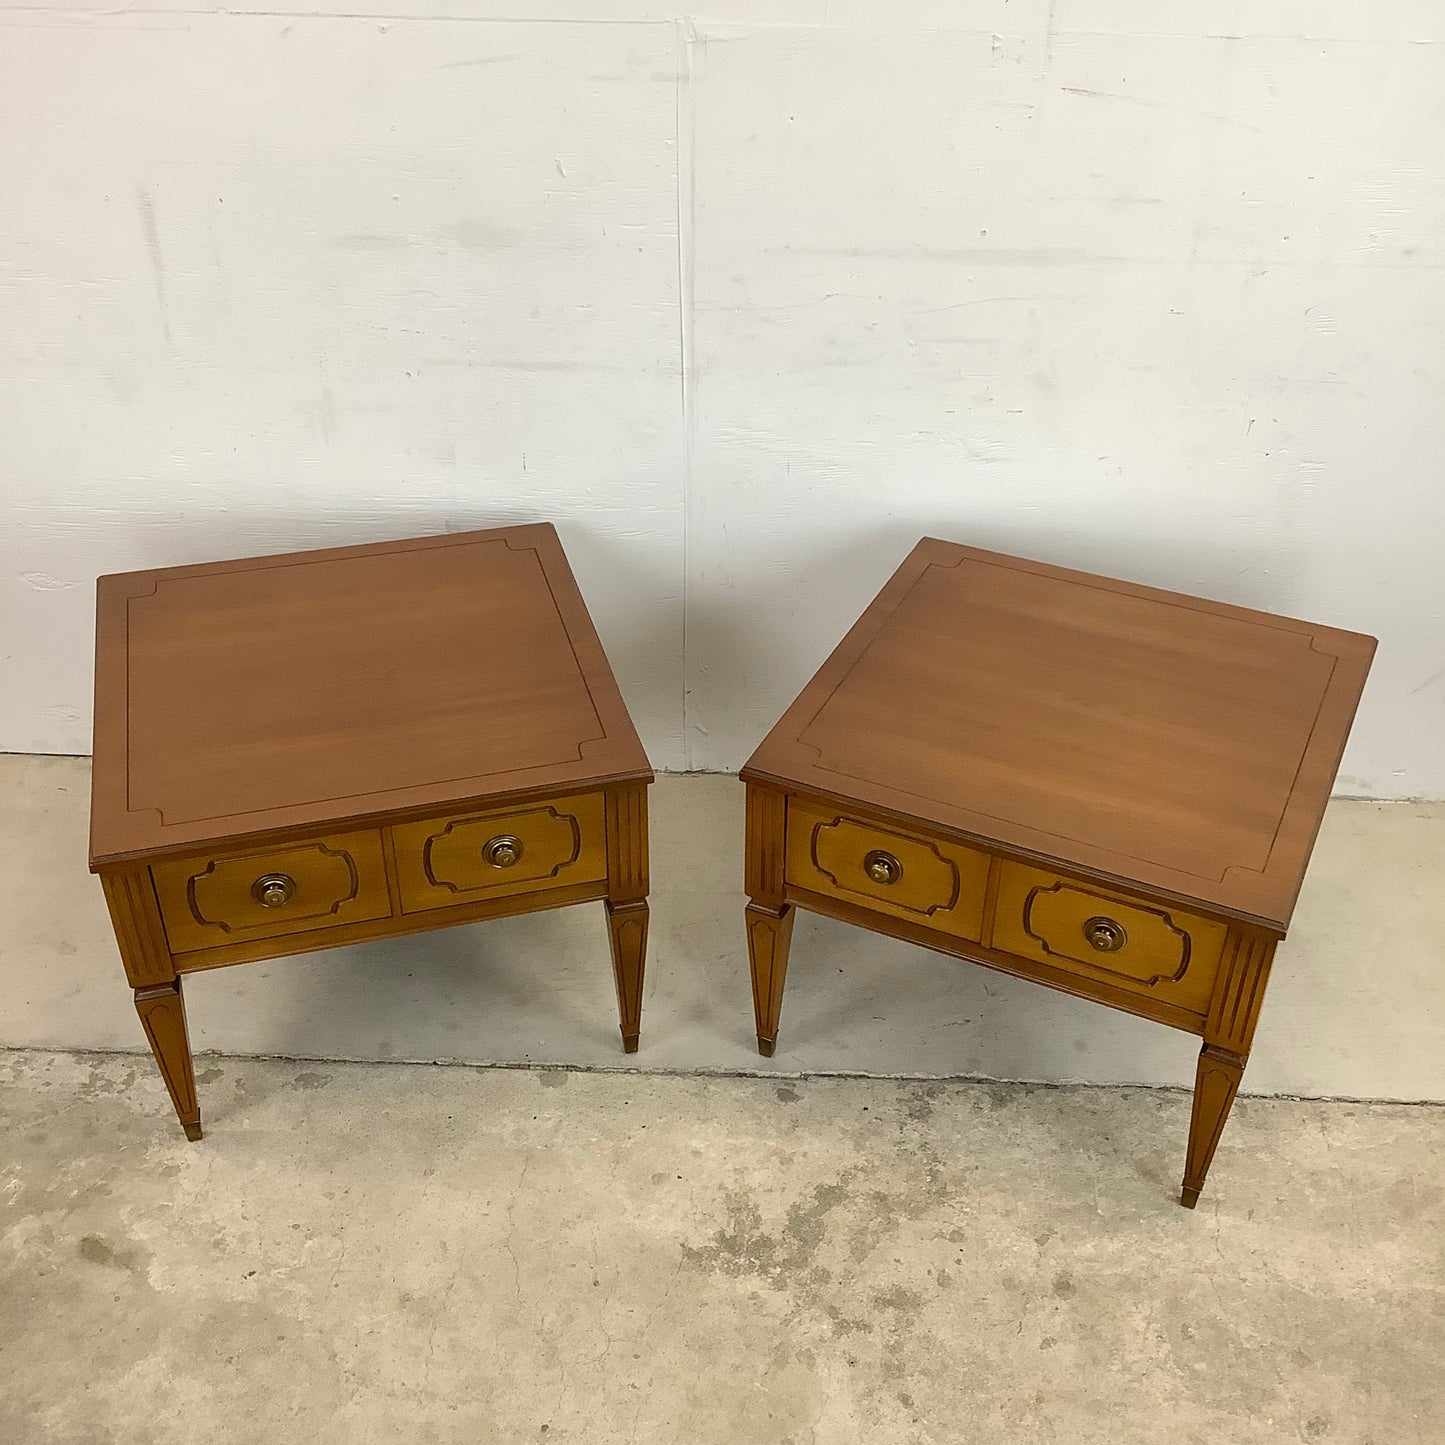 Pair Vintage End Tables With Decorative Drawer Fronts